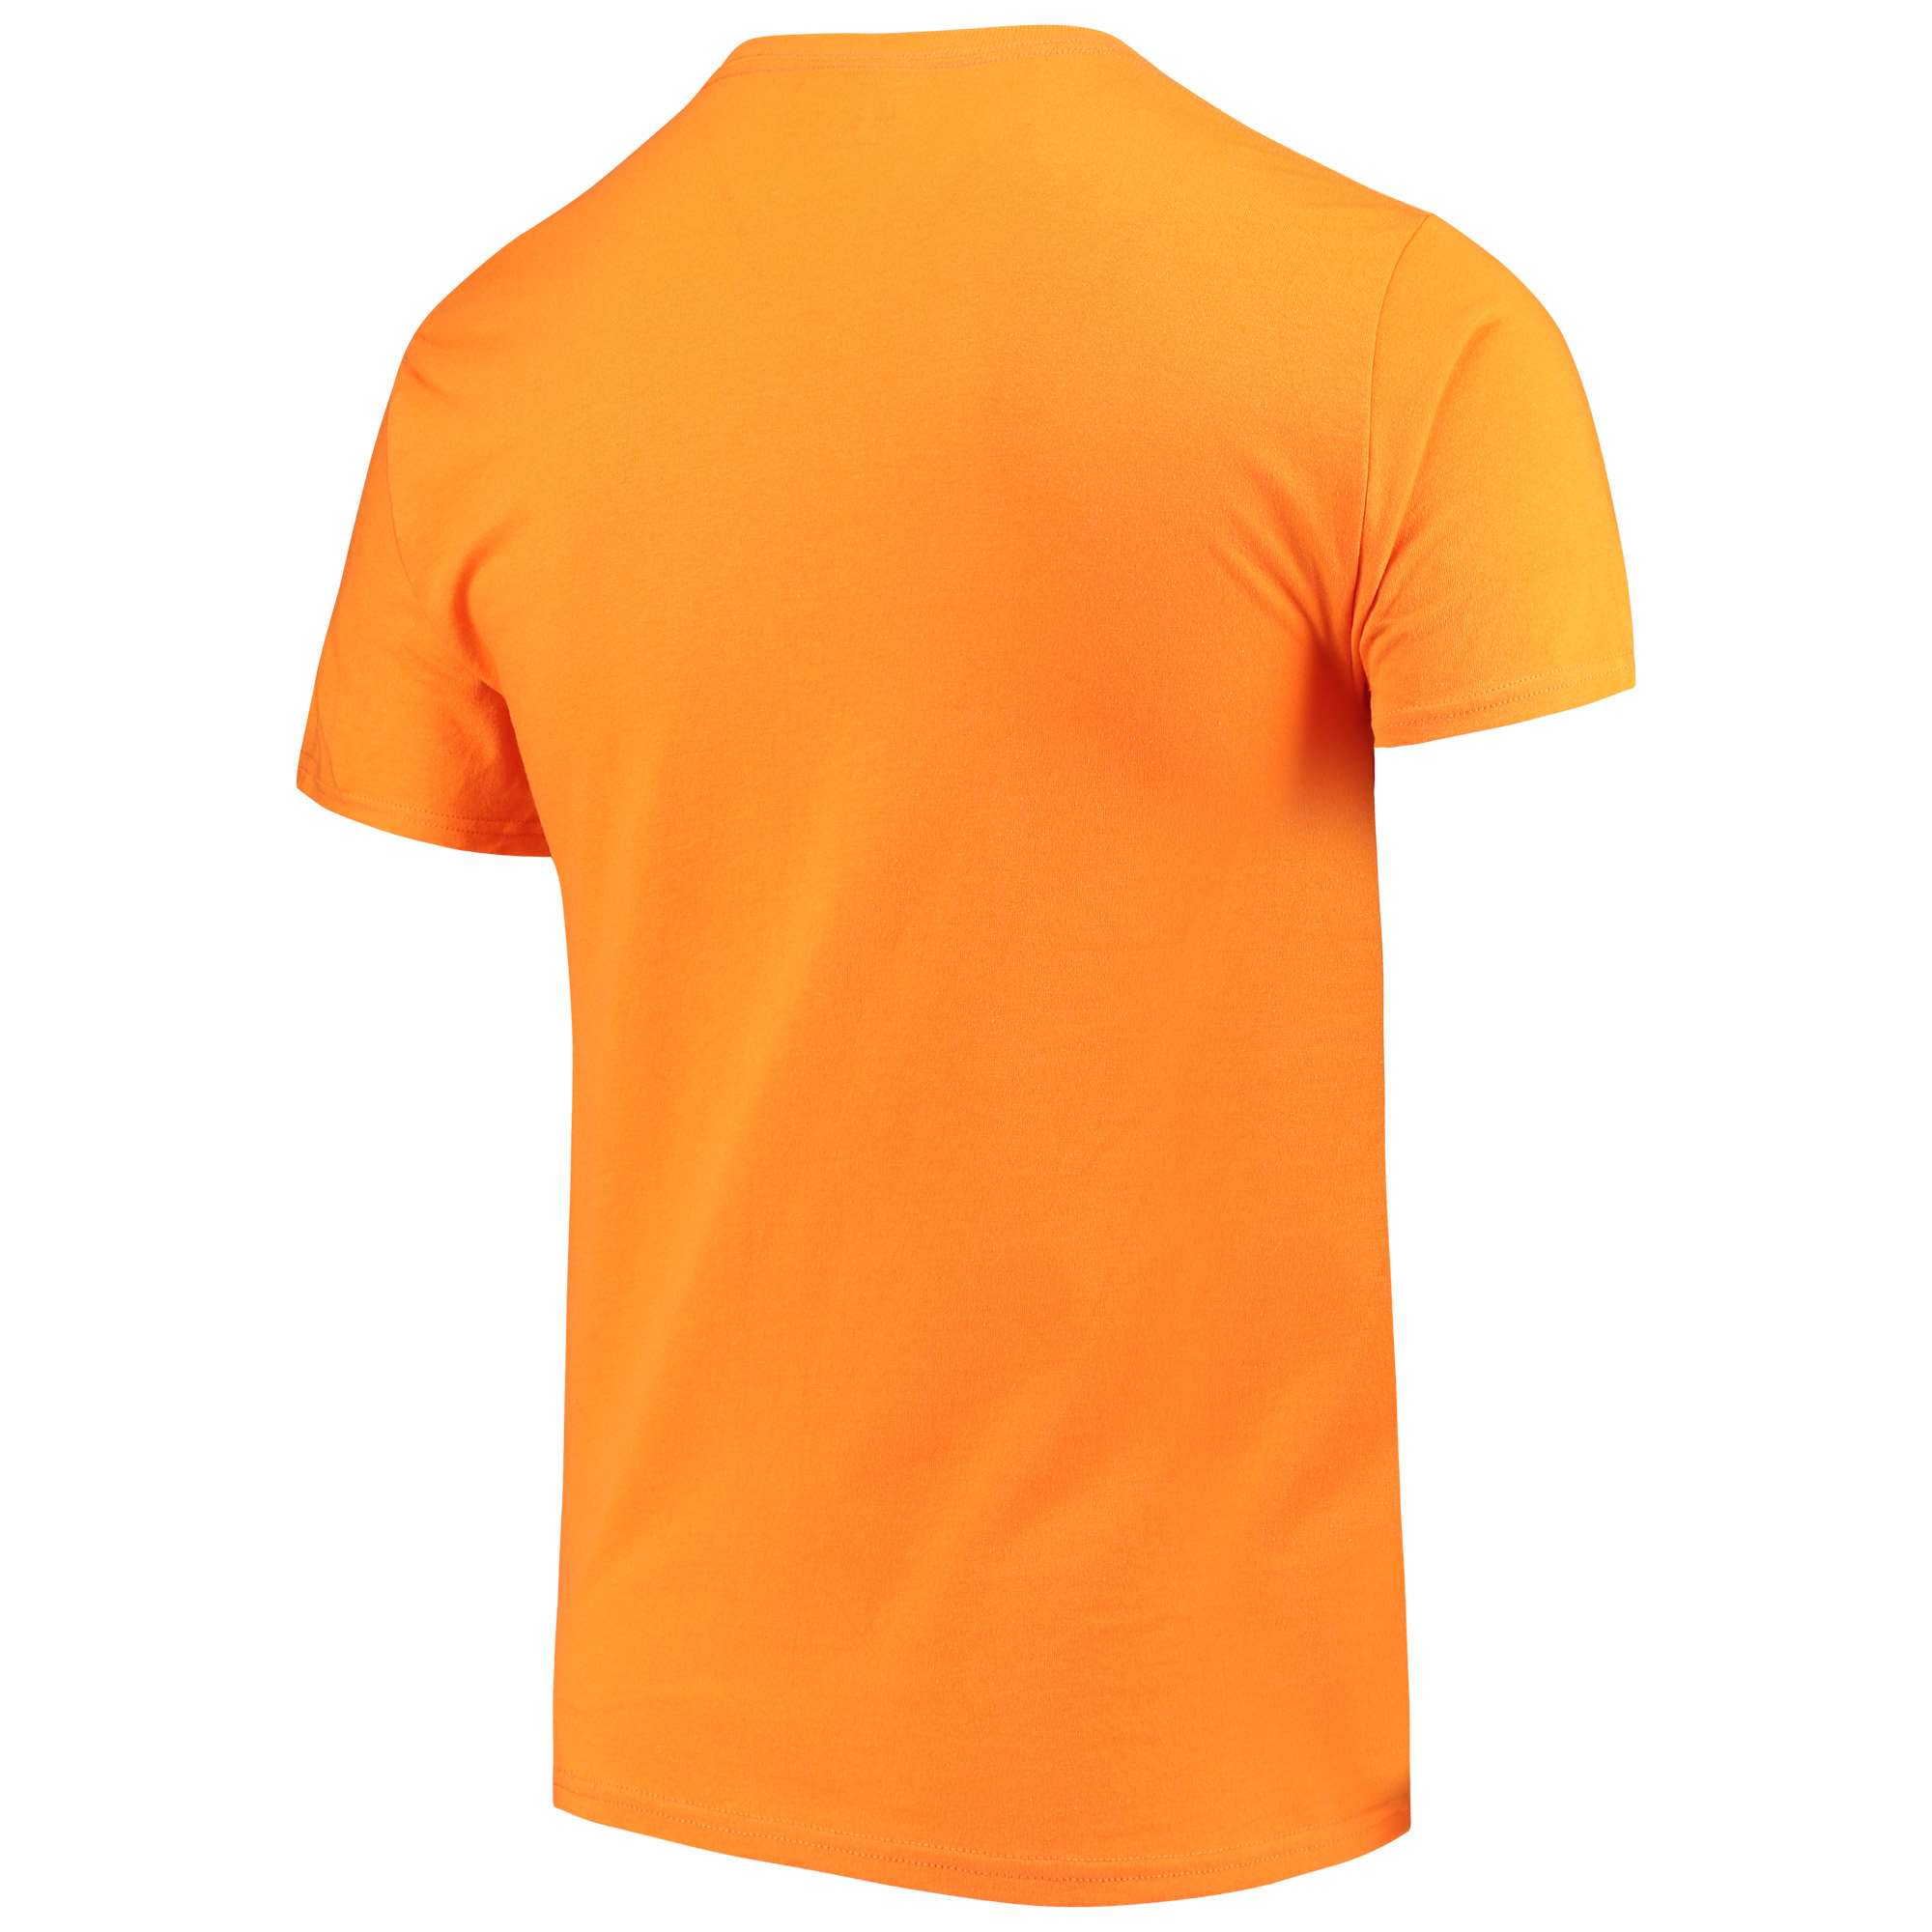 NCAA Tennessee Volunteers, Men's Classic Cotton T-Shirt - image 3 of 3